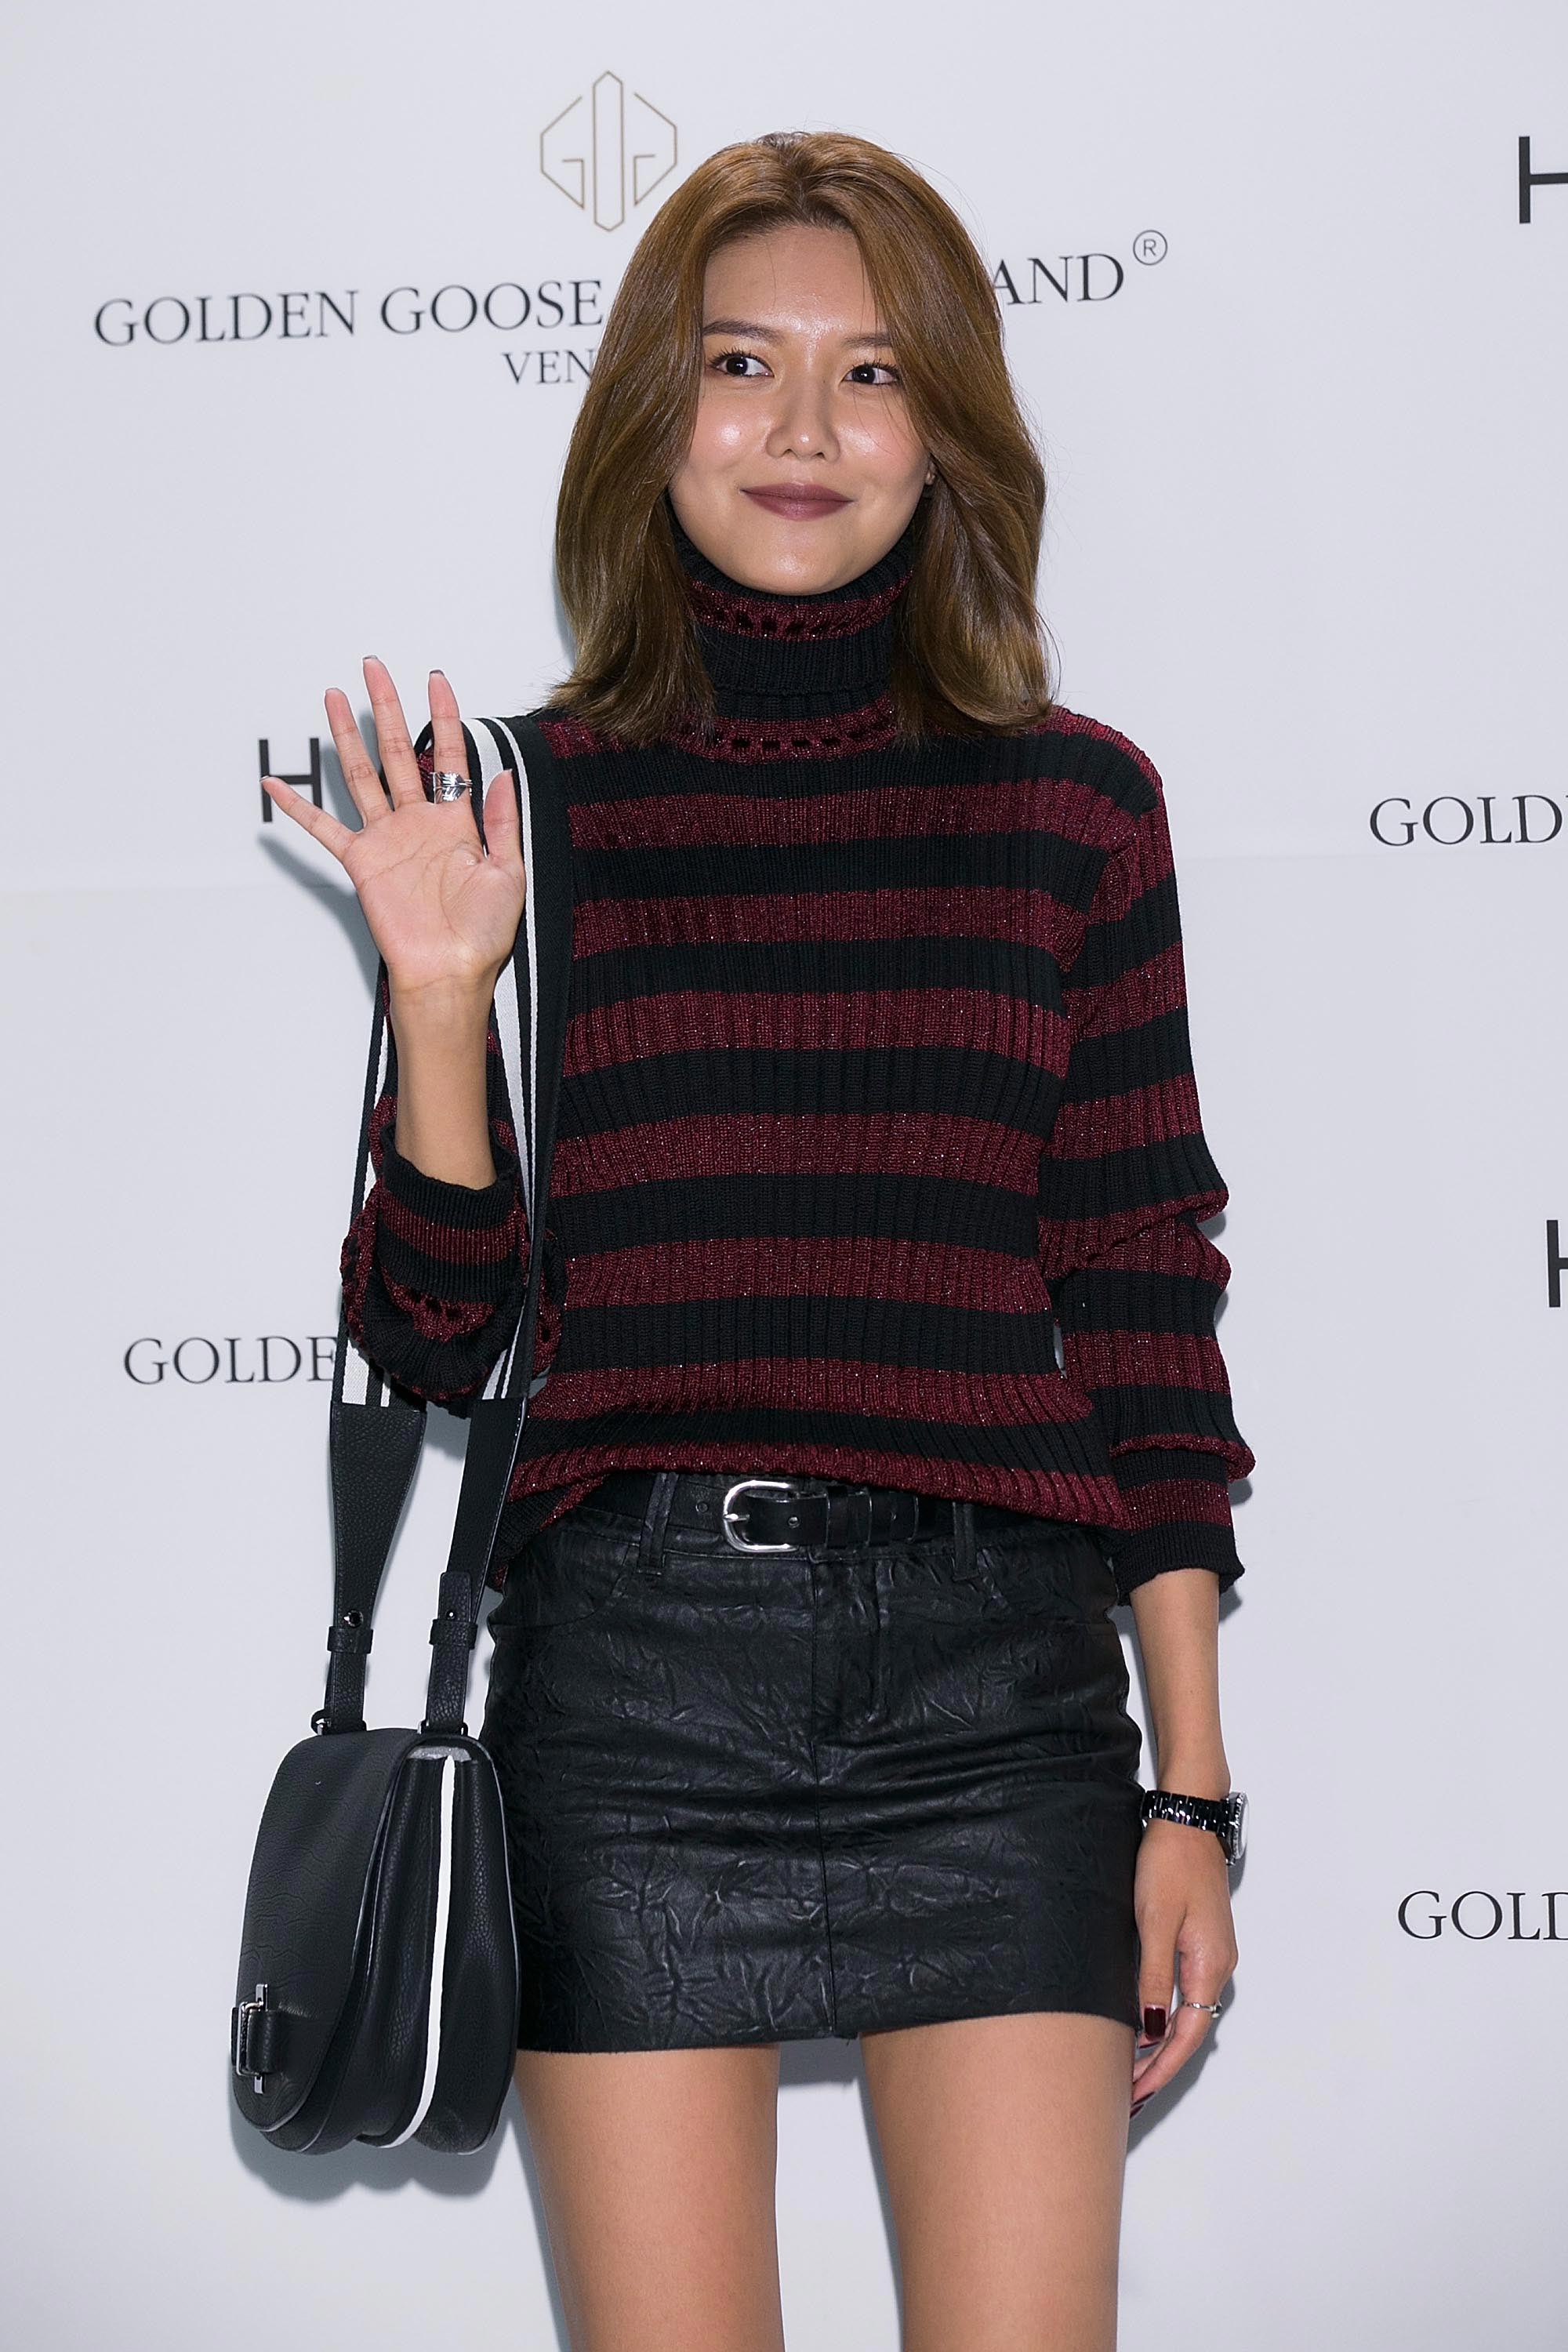 Sooyoung attends the photocall for Golden Goose Deluxe Brand